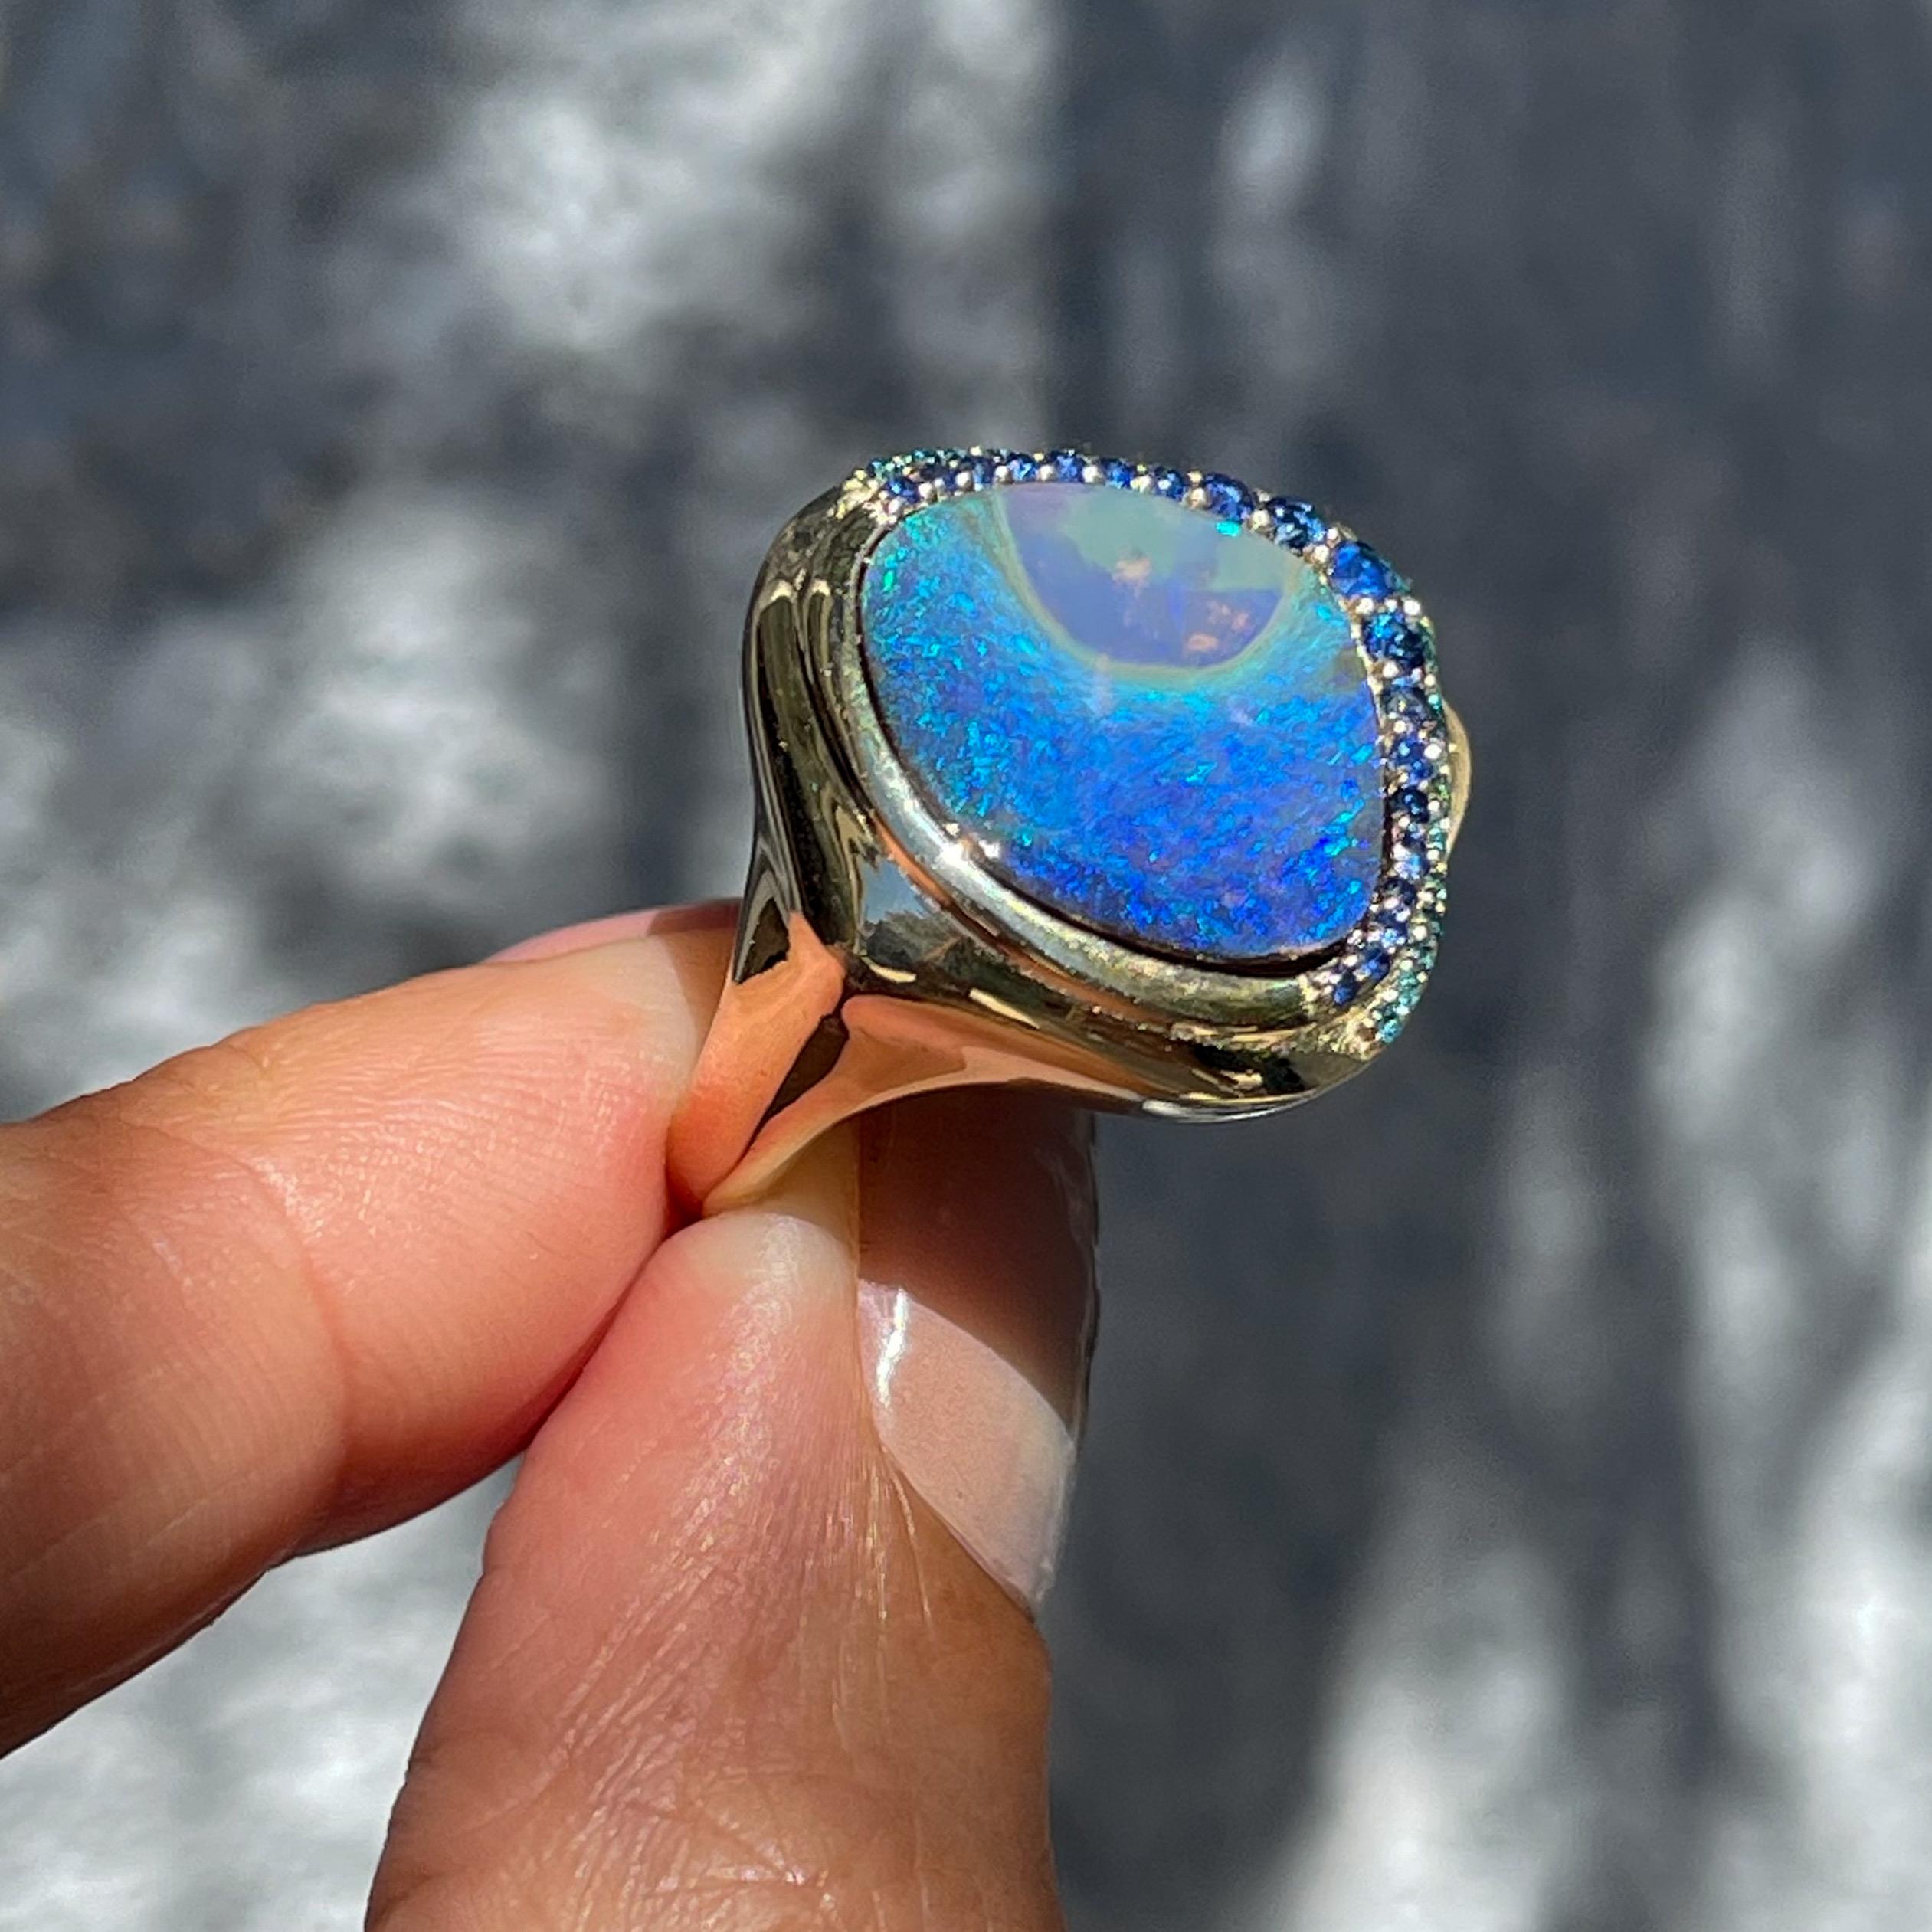 Brilliant Cut Plume Australian Opal Ring in Gold with Sapphires and Diamonds by NIXIN Jewelry For Sale